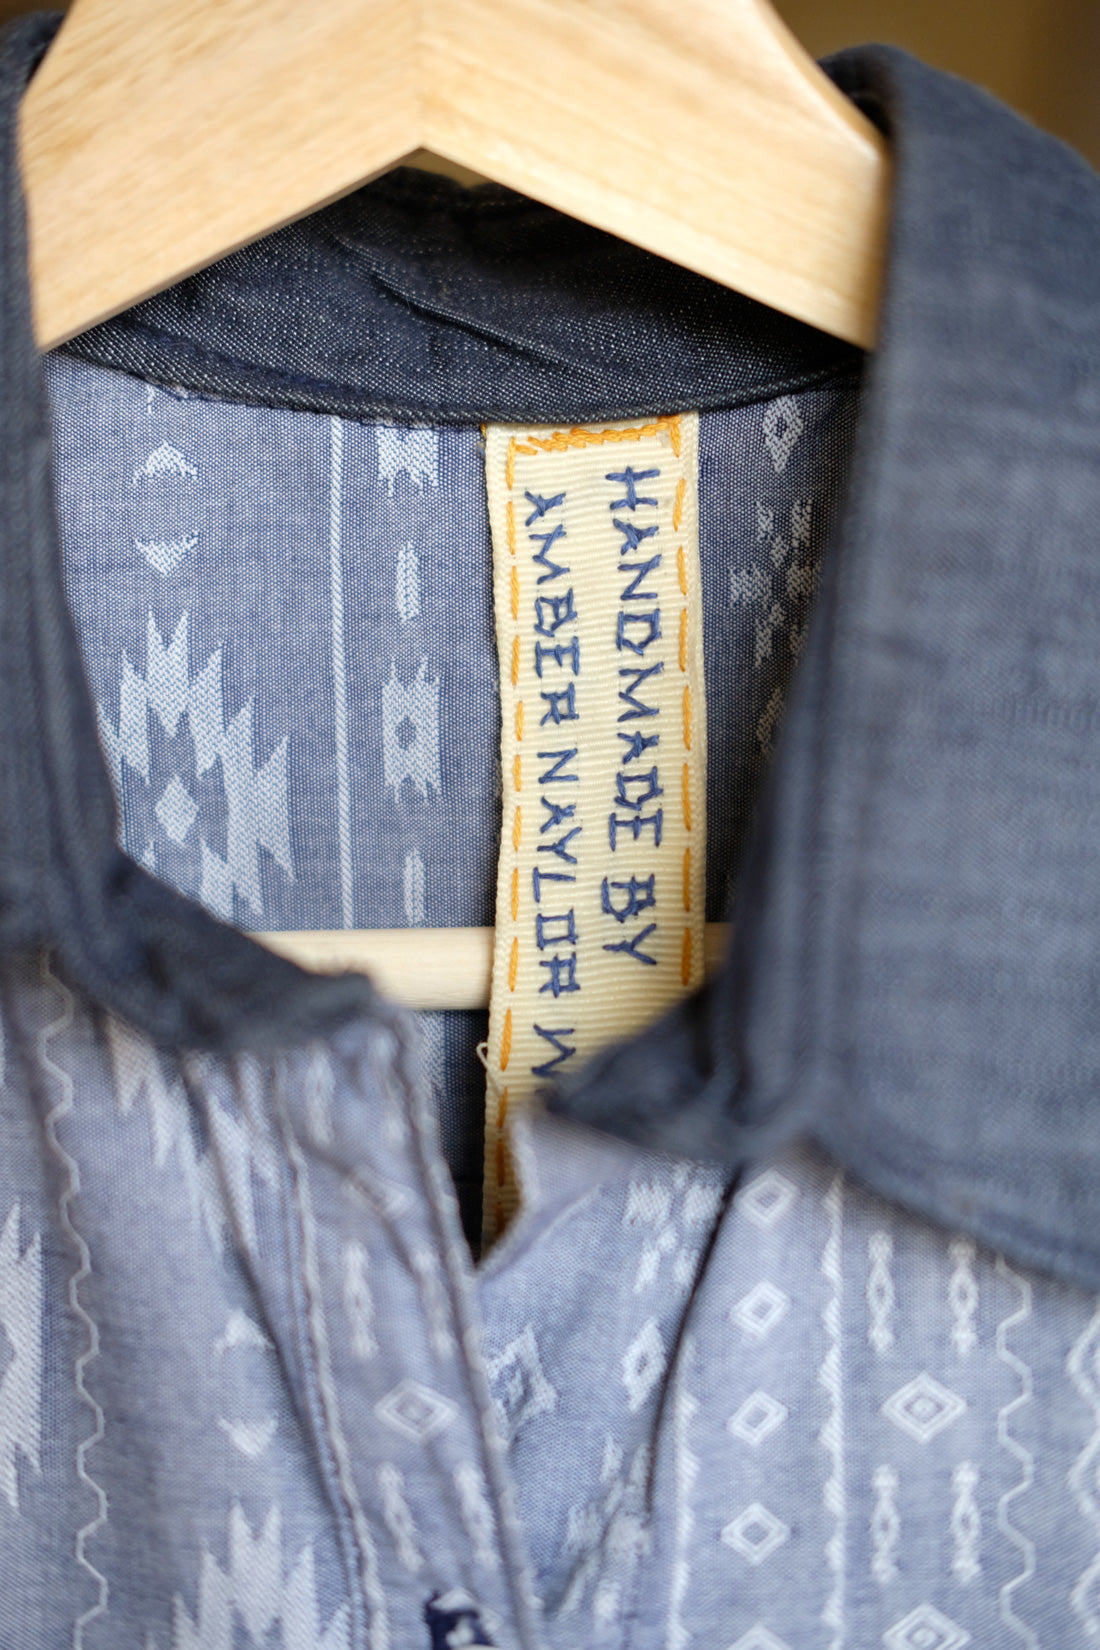 Hand-stitched clothing tag